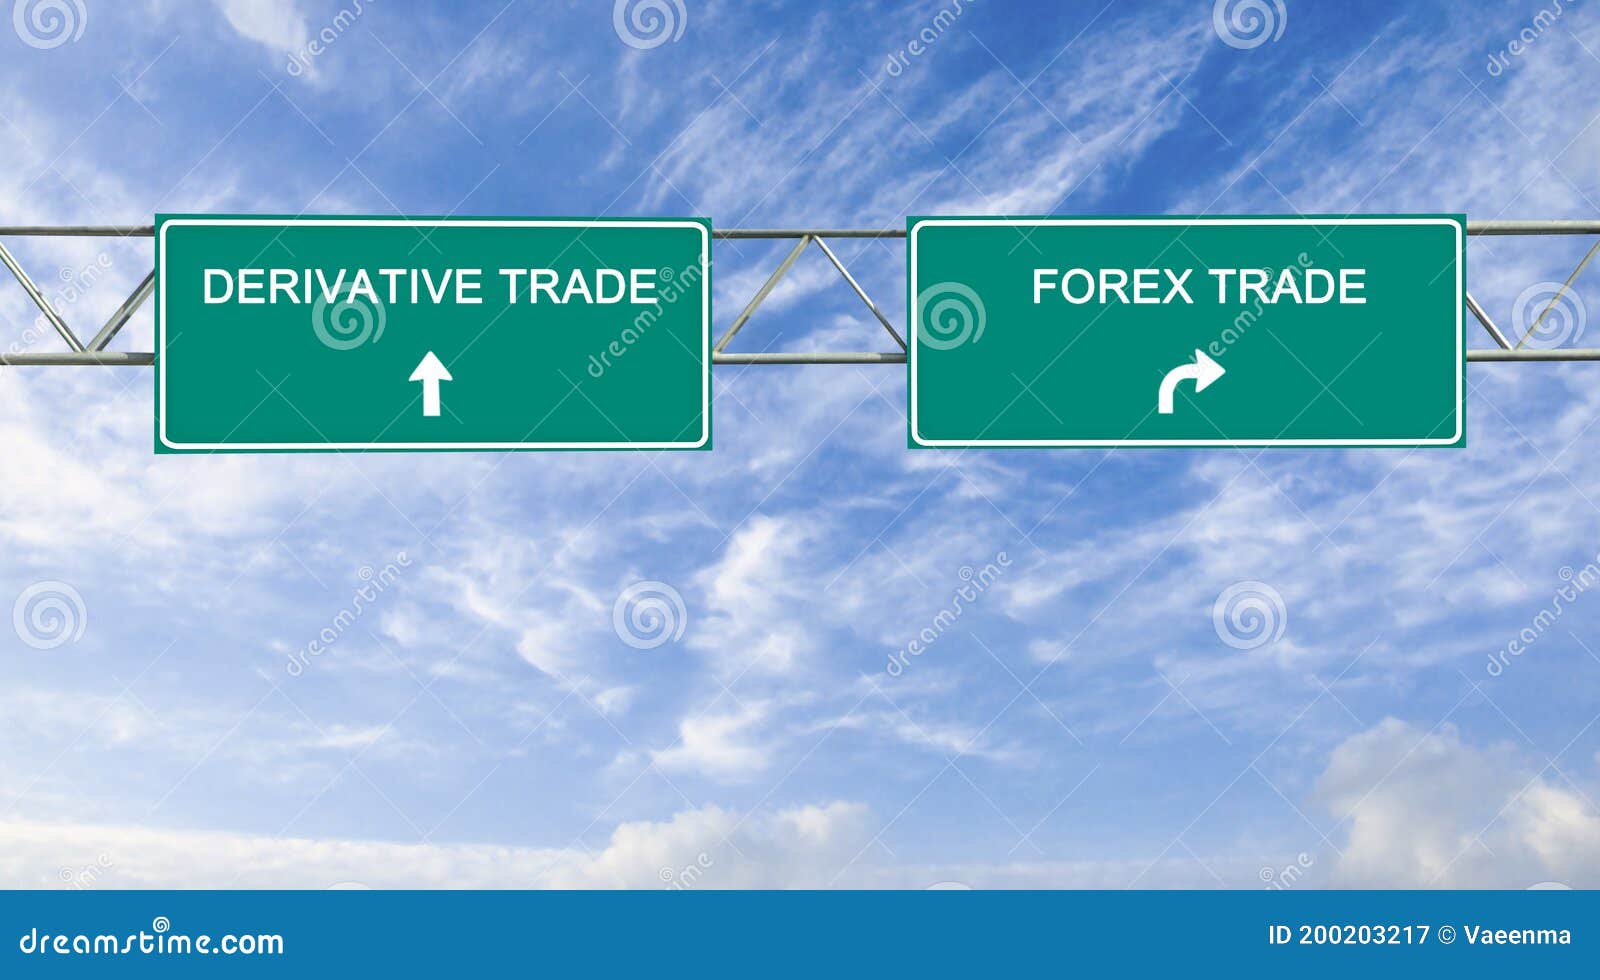 derivative  and forex trade